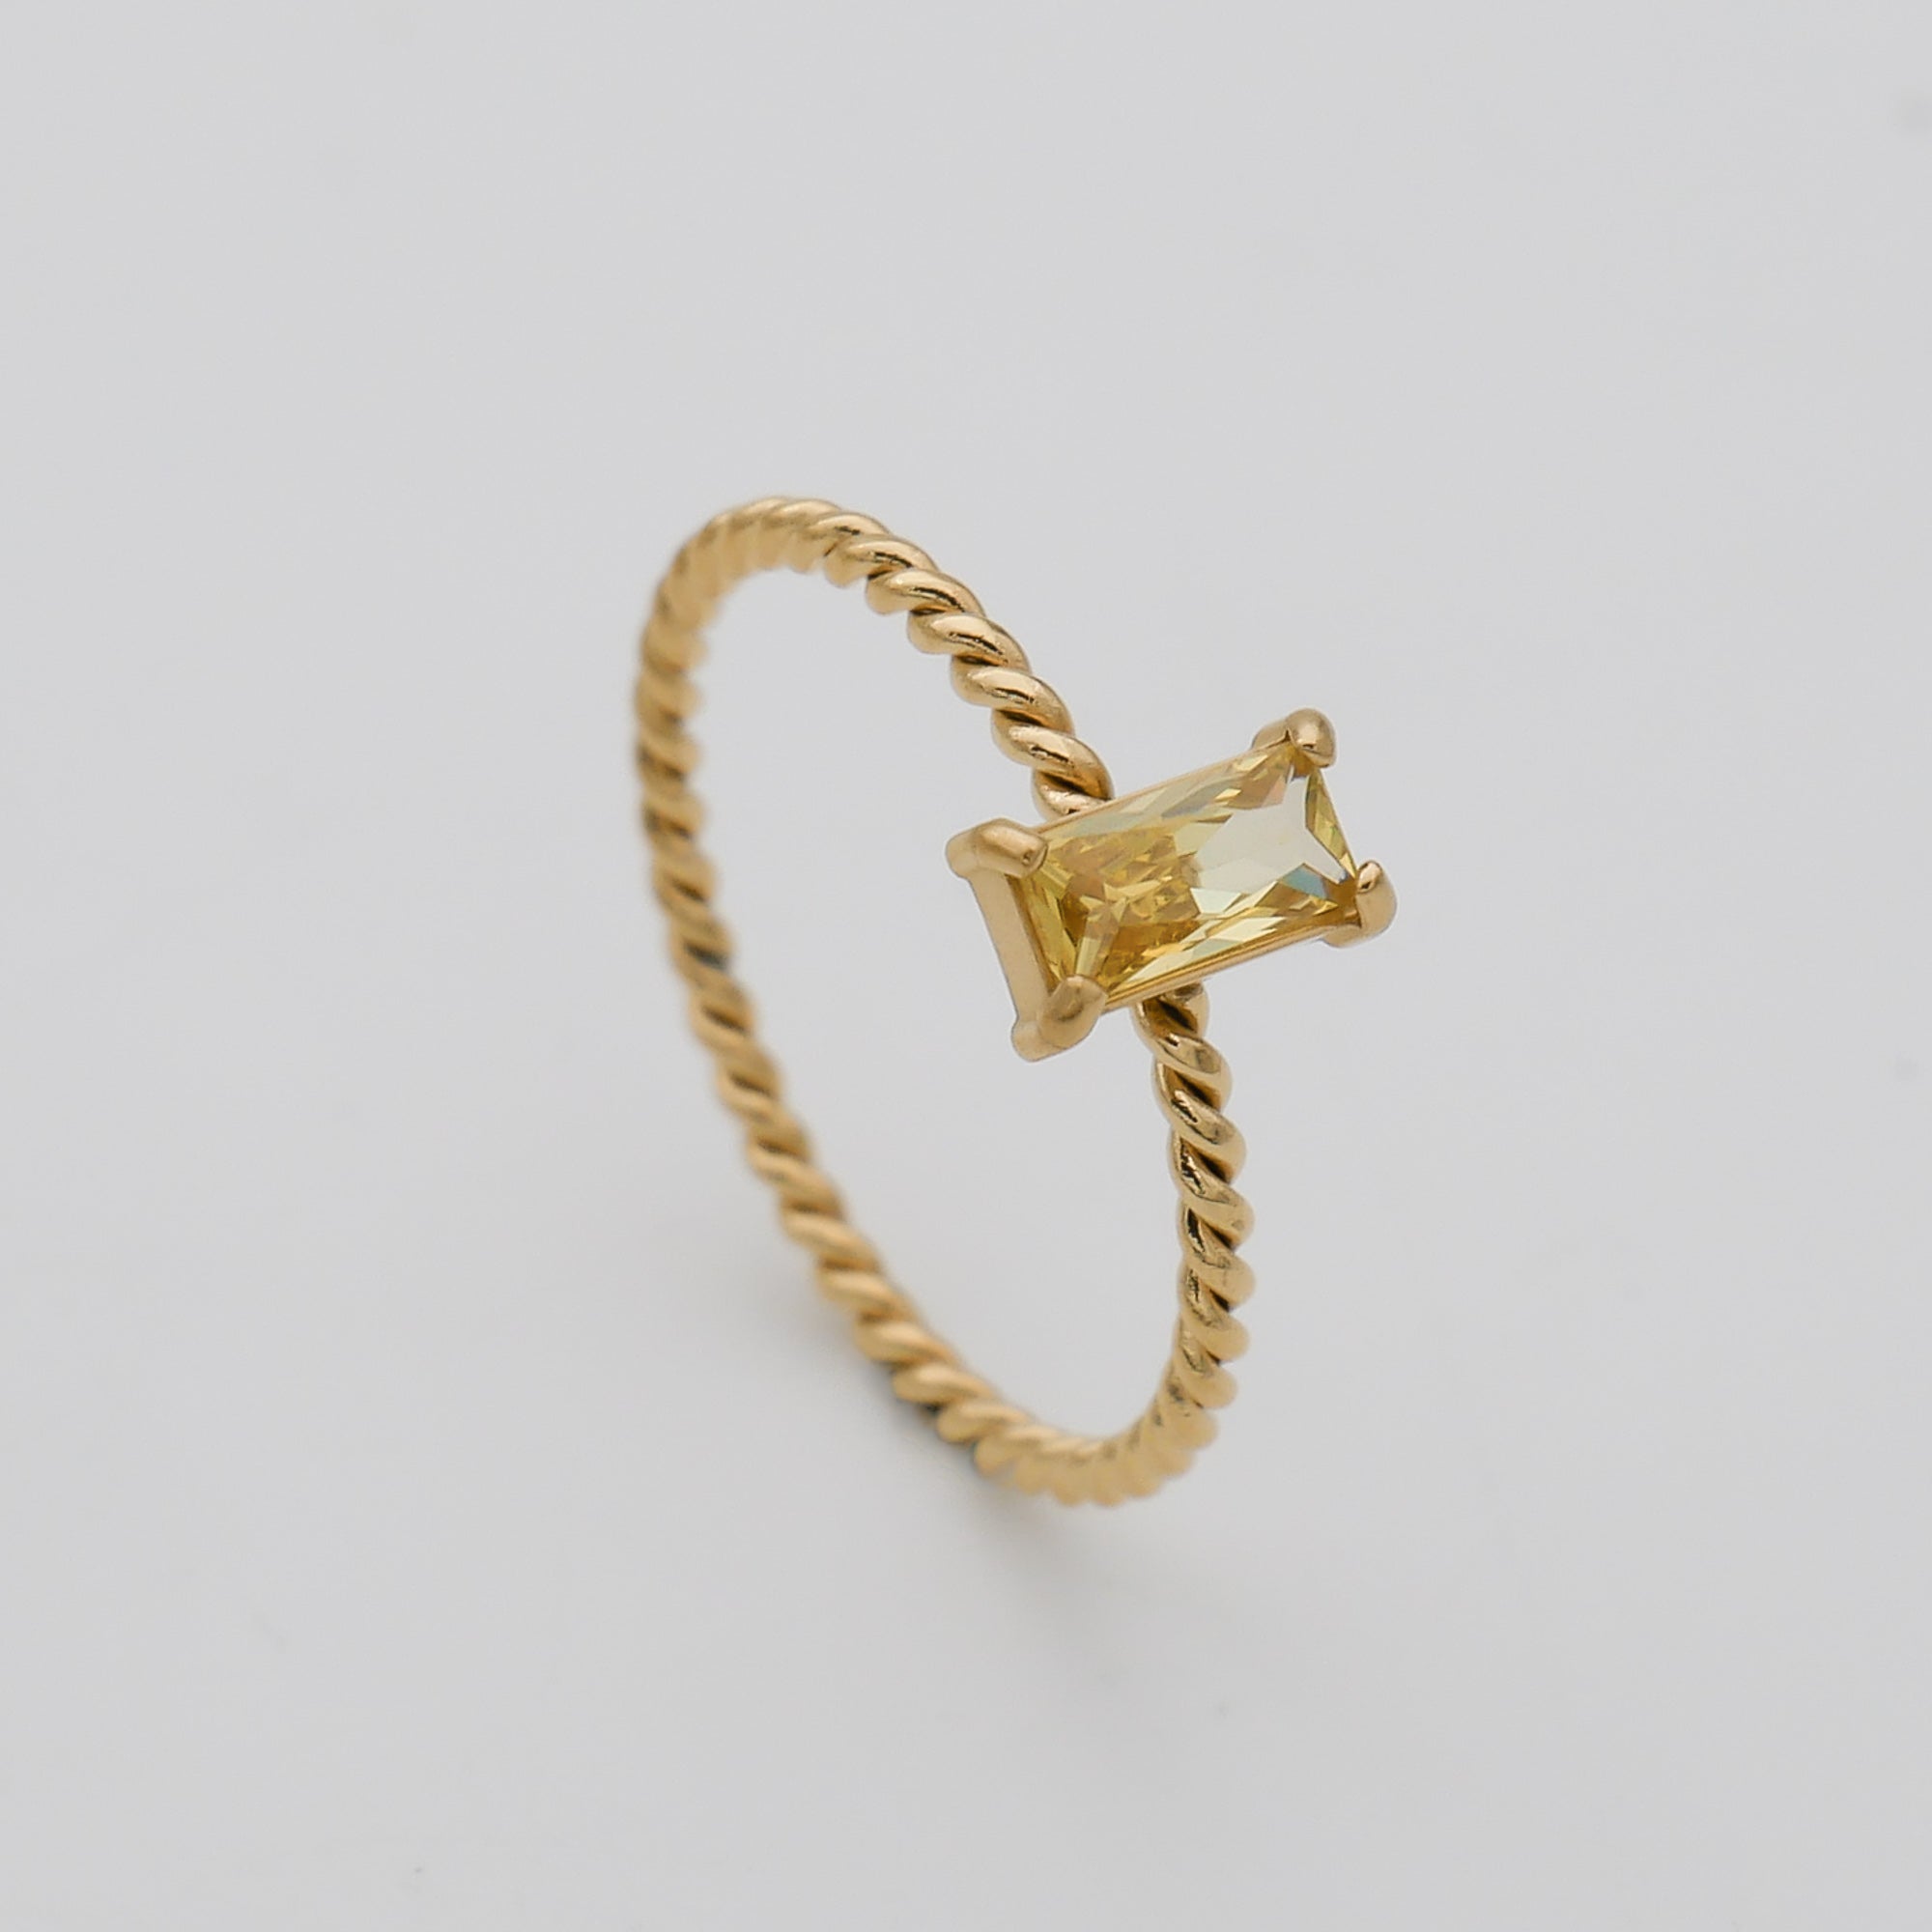 Selin twisted ring in yellow gold